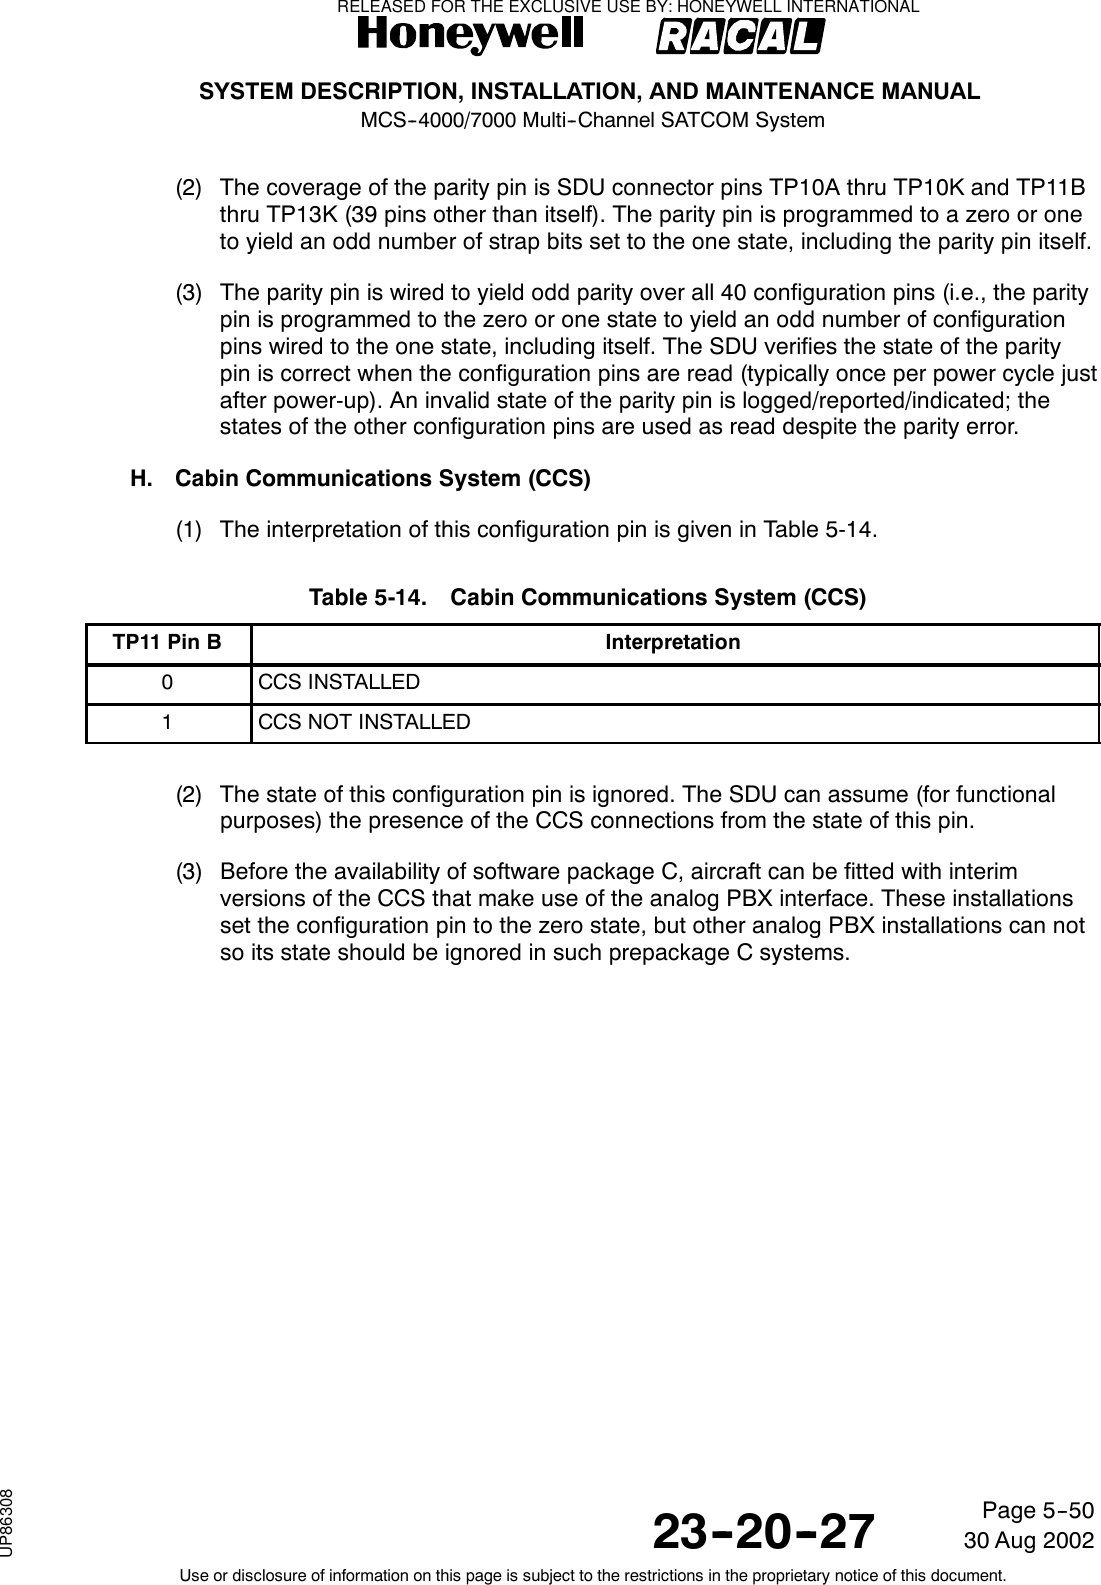 SYSTEM DESCRIPTION, INSTALLATION, AND MAINTENANCE MANUALMCS--4000/7000 Multi--Channel SATCOM System23--20--2730 Aug 2002Use or disclosure of information on this page is subject to the restrictions in the proprietary notice of this document.Page 5--50(2) The coverage of the parity pin is SDU connector pins TP10A thru TP10K and TP11Bthru TP13K (39 pins other than itself). The parity pin is programmed to a zero or oneto yield an odd number of strap bits set to the one state, including the parity pin itself.(3) The parity pin is wired to yield odd parity over all 40 configuration pins (i.e., the paritypin is programmed to the zero or one state to yield an odd number of configurationpins wired to the one state, including itself. The SDU verifies the state of the paritypin is correct when the configuration pins are read (typically once per power cycle justafter power-up). An invalid state of the parity pin is logged/reported/indicated; thestates of the other configuration pins are used as read despite the parity error.H. Cabin Communications System (CCS)(1) The interpretation of this configuration pin is given in Table 5-14.Table 5-14. Cabin Communications System (CCS)TP11 Pin B Interpretation0CCS INSTALLED1CCS NOT INSTALLED(2) The state of this configuration pin is ignored. The SDU can assume (for functionalpurposes) the presence of the CCS connections from the state of this pin.(3) Before the availability of software package C, aircraft can be fitted with interimversions of the CCS that make use of the analog PBX interface. These installationsset the configuration pin to the zero state, but other analog PBX installations can notso its state should be ignored in such prepackage C systems.RELEASED FOR THE EXCLUSIVE USE BY: HONEYWELL INTERNATIONALUP86308